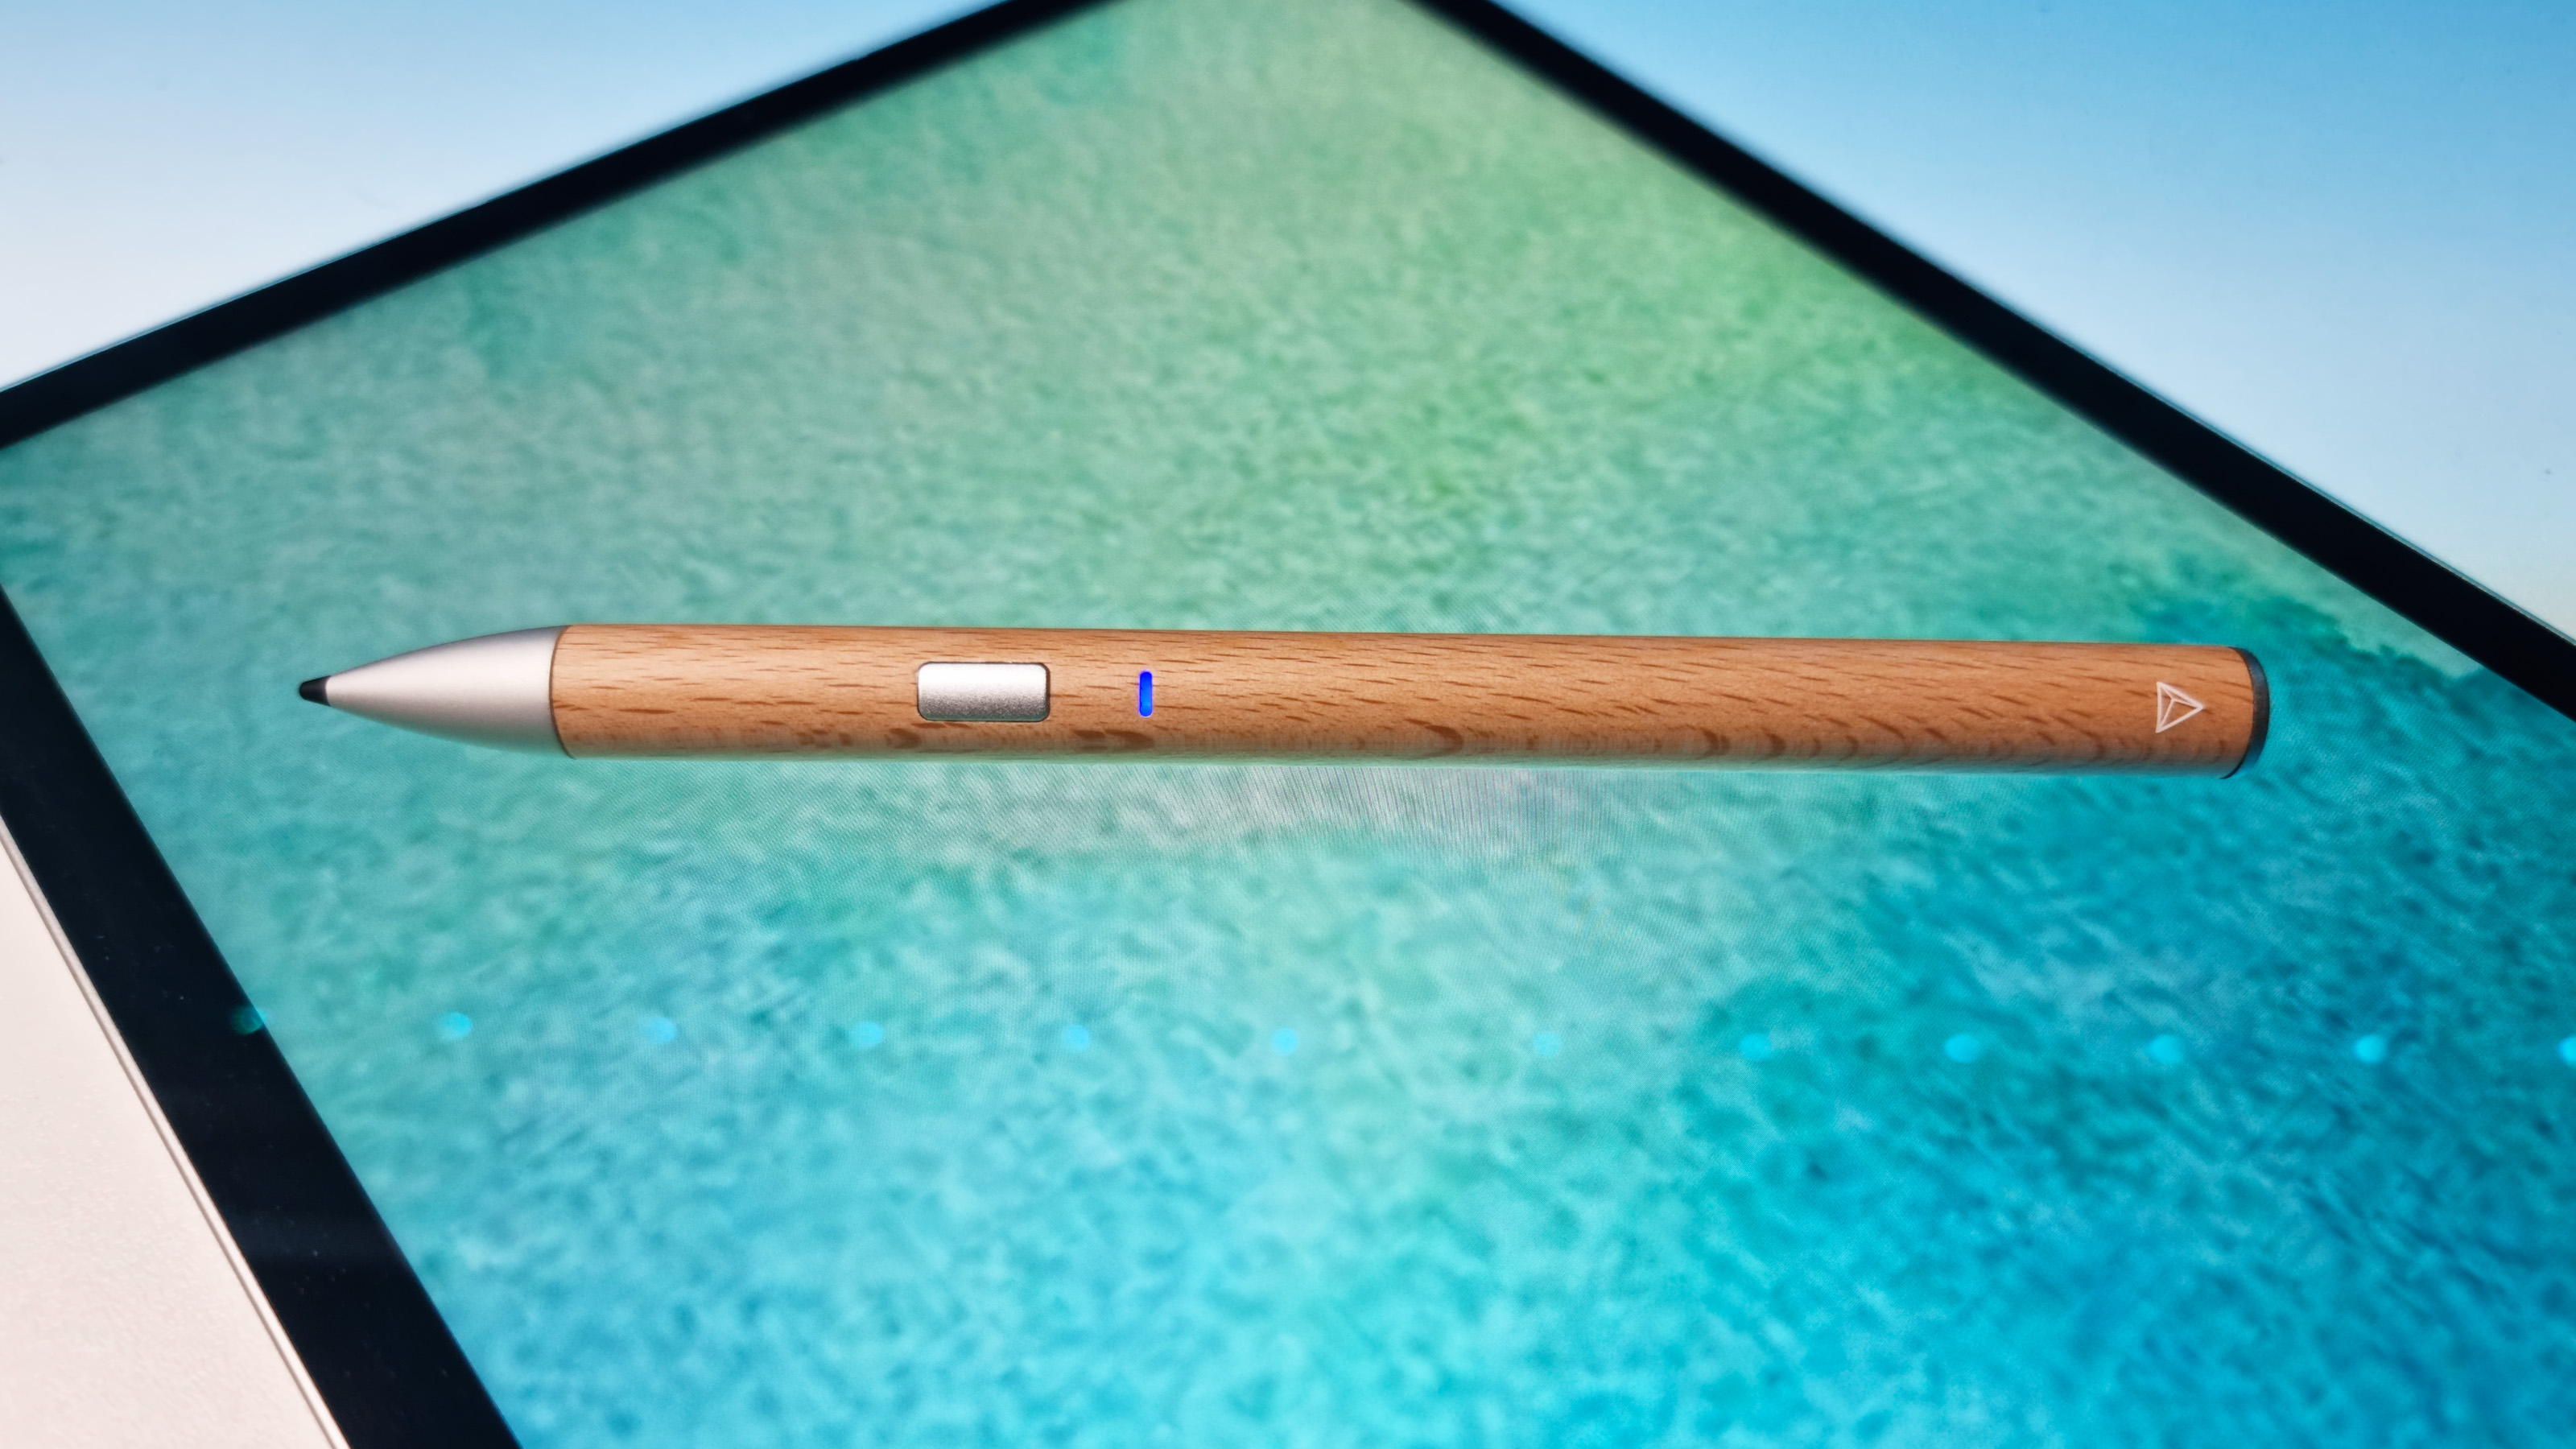 A shot of the Adonit Log Stylus on colorful background